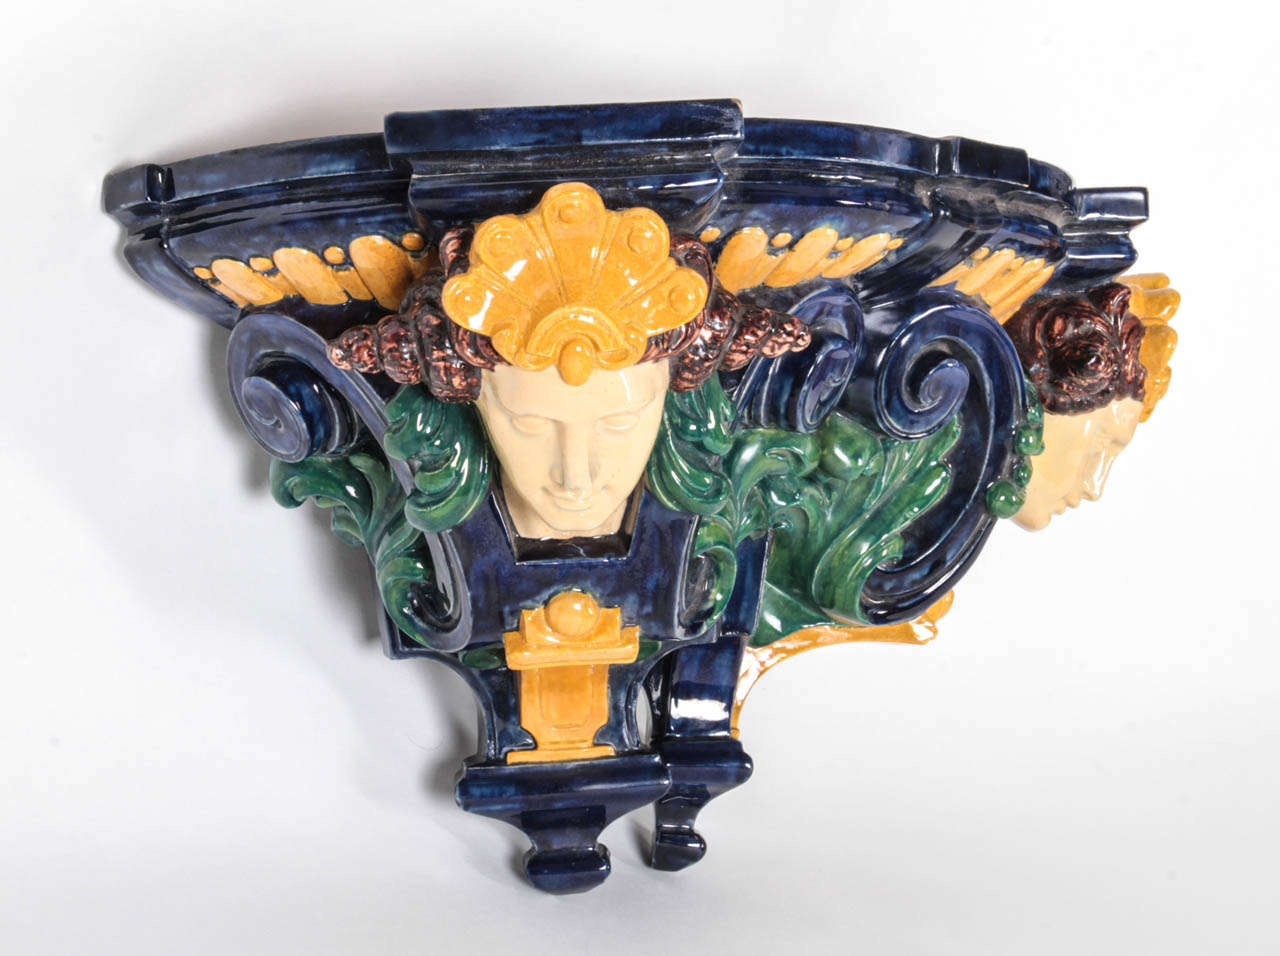 Eugene Schopin (1831-1893) Montigny-sur-Loing, France.

Renaissance-Revival style Majolica wall shelf, circa 1872.

Hand modeled and cast ceramic with highly stylized caryatids and floral details glazed with rich cobalt blue, green, gold and